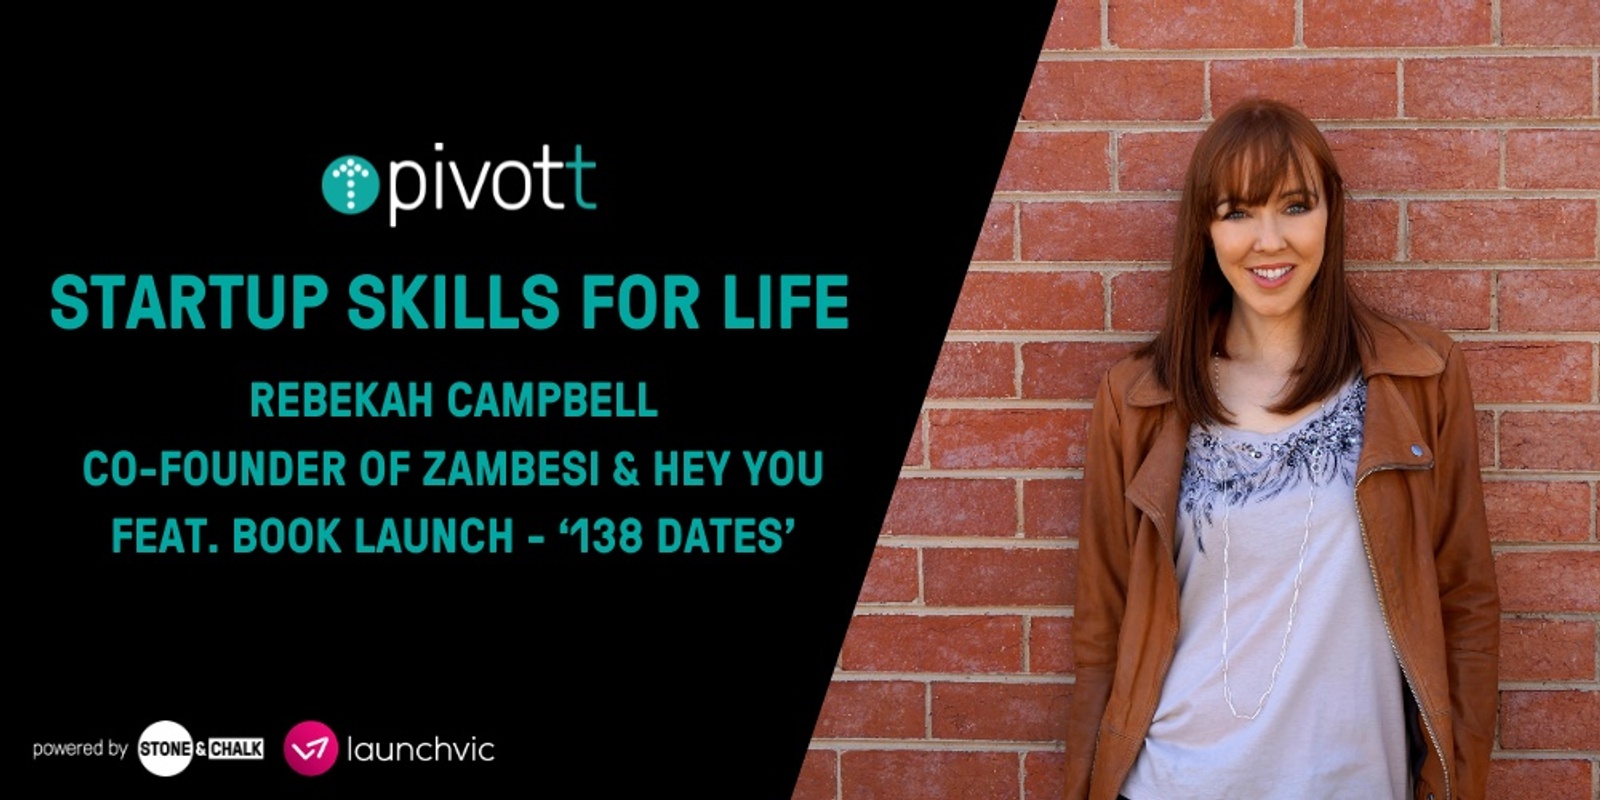 Banner image for Fireside Chat with Rebekah Campbell: Startup Skills for Life & Book Launch for '138 Dates'